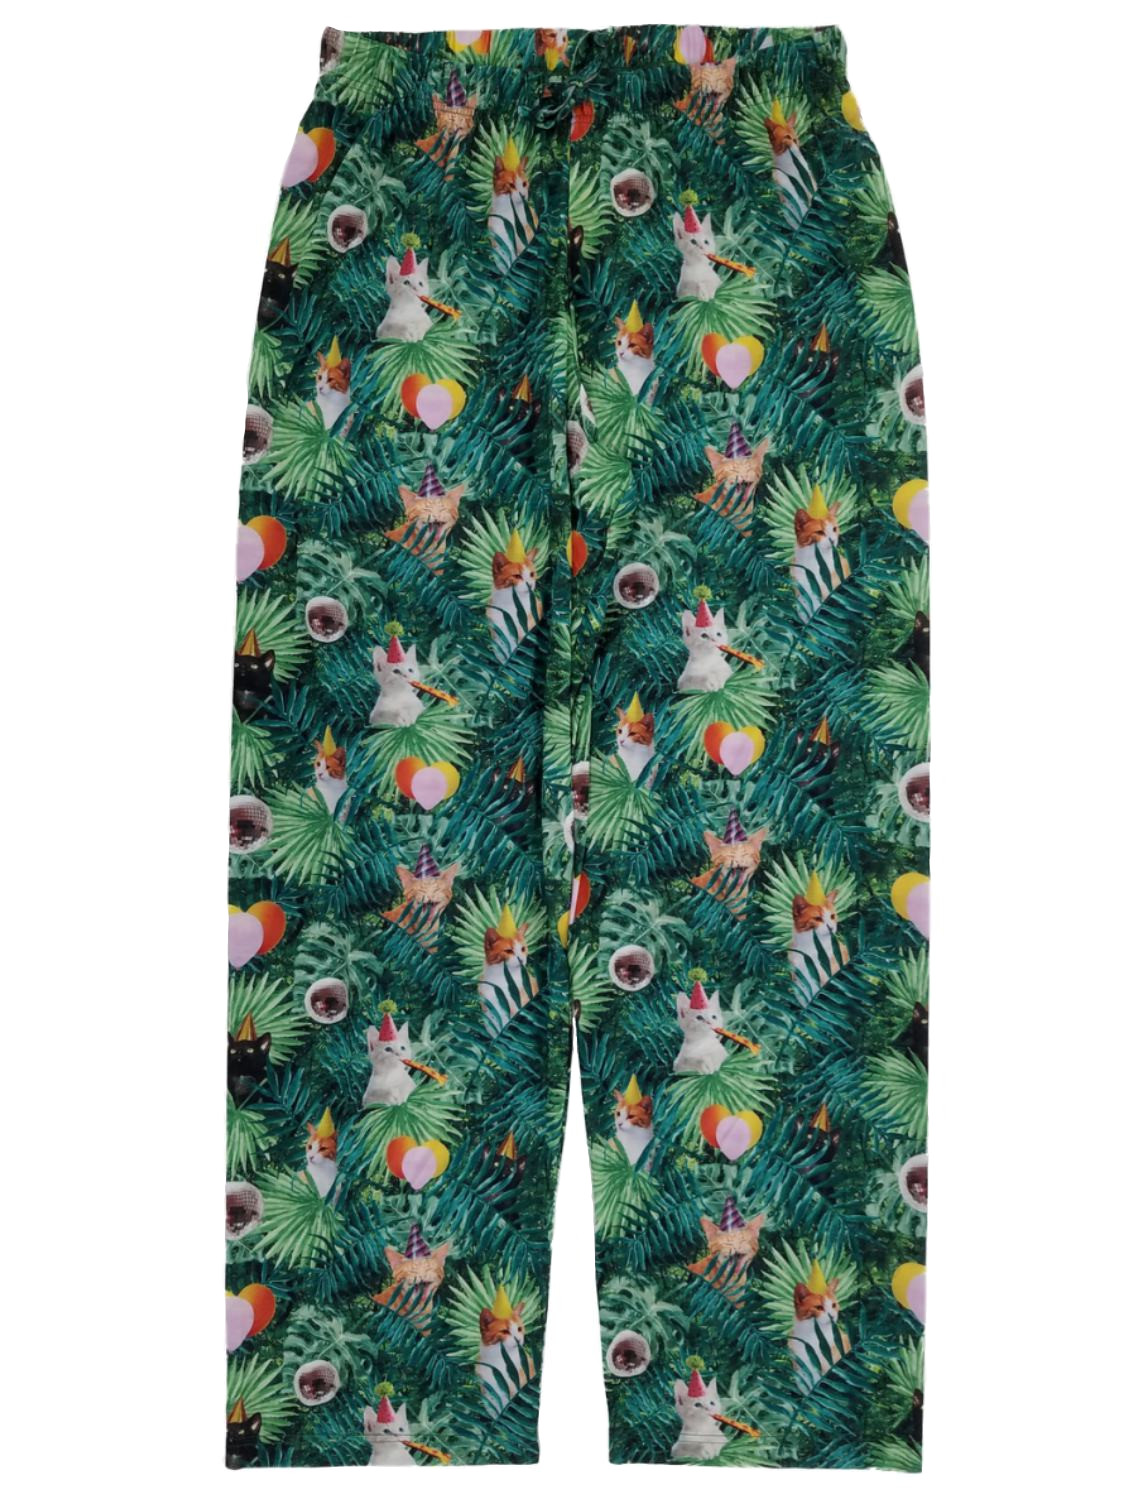 Owl Night Long Mens Green Tropical Cat Party Disco Ball Kittens Lounge Pants Pajama Bottoms S